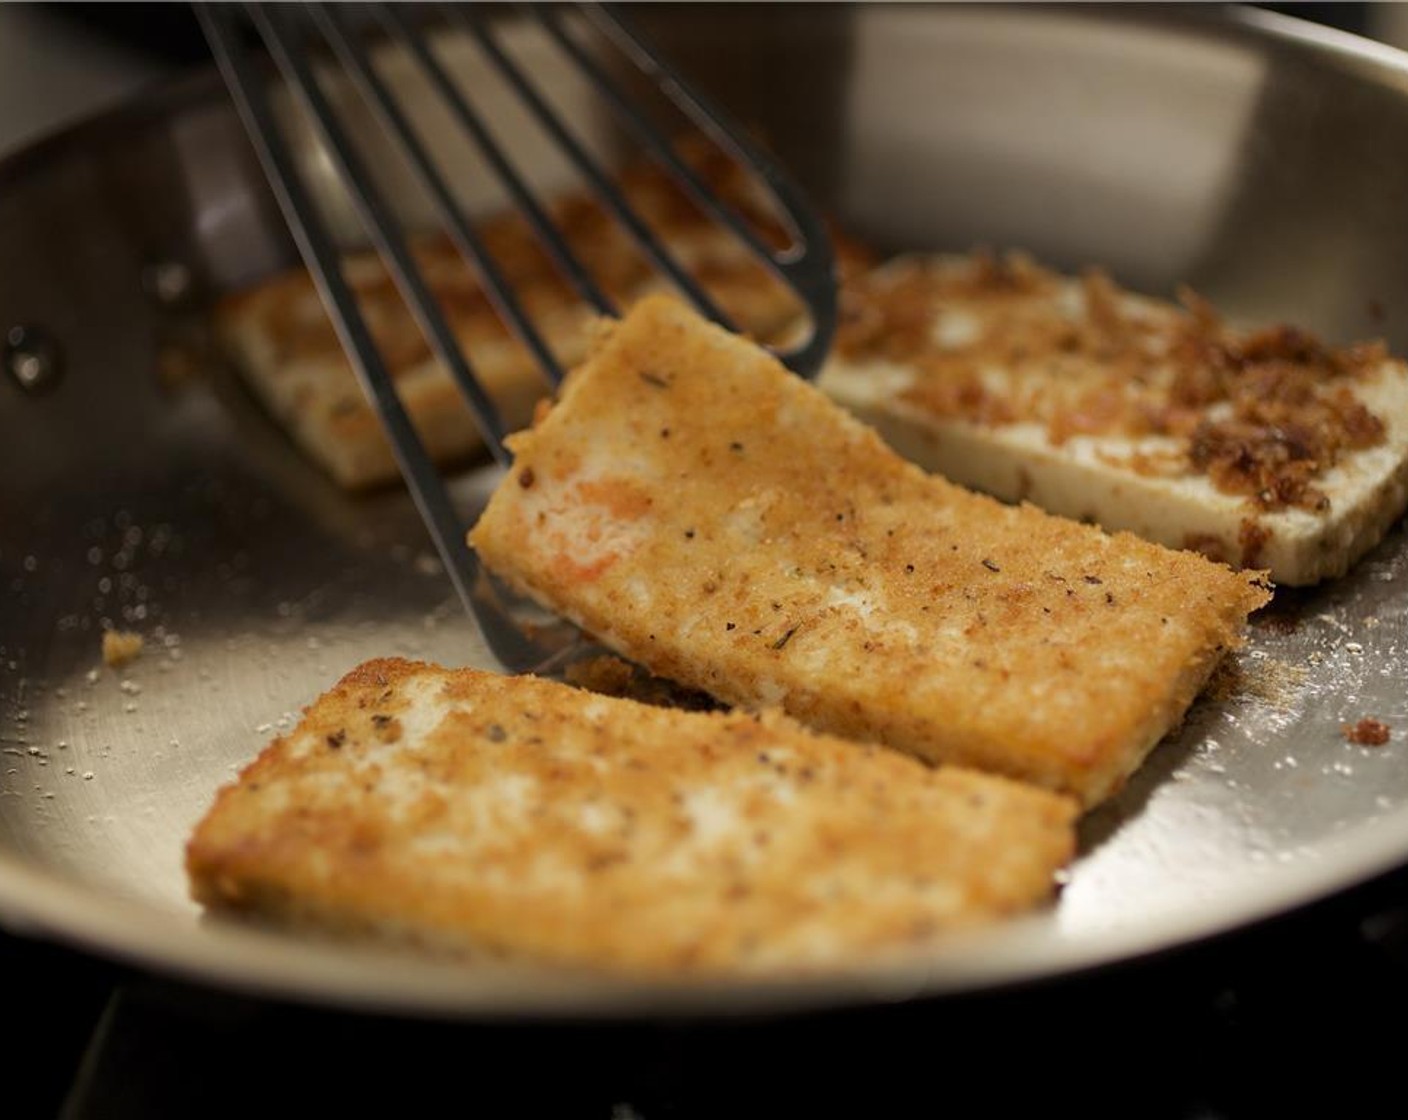 step 6 Heat a medium saute pan over medium heat. Add Olive Oil (1 Tbsp) and when hot, carefully add the tofu slices. Sear on each side for two minutes until golden brown.